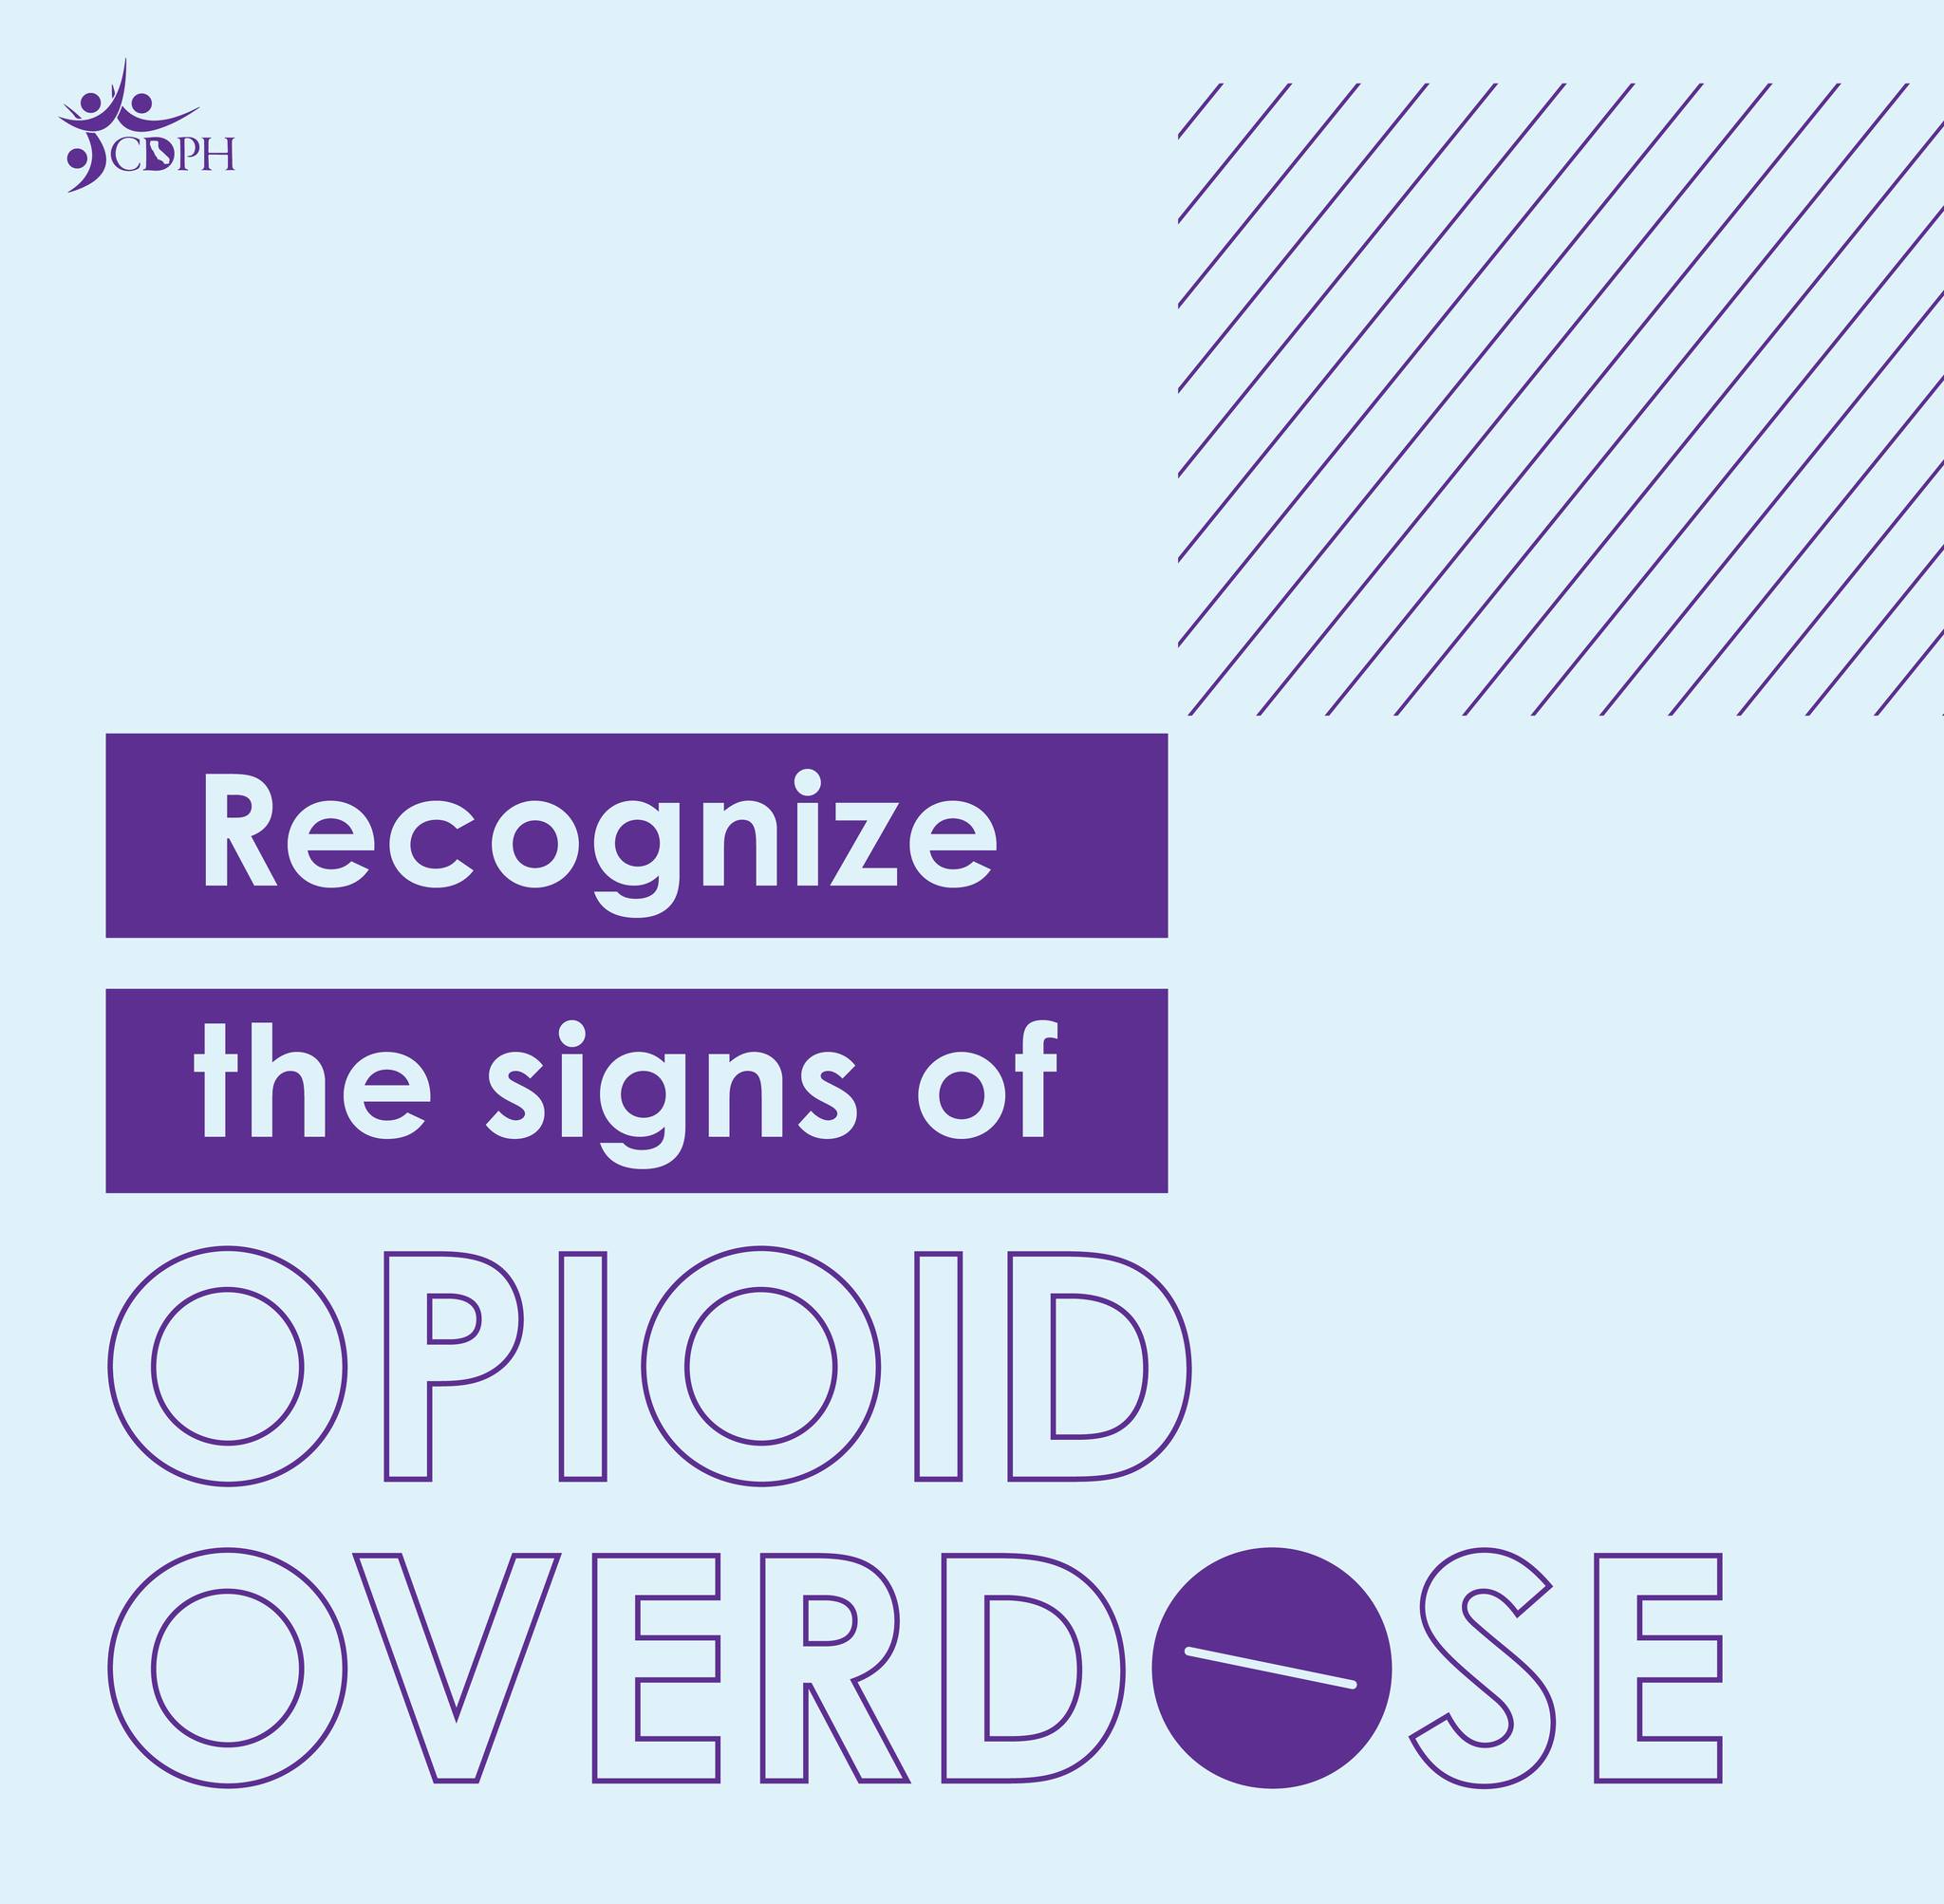 Recognize the signs of opioid overdose